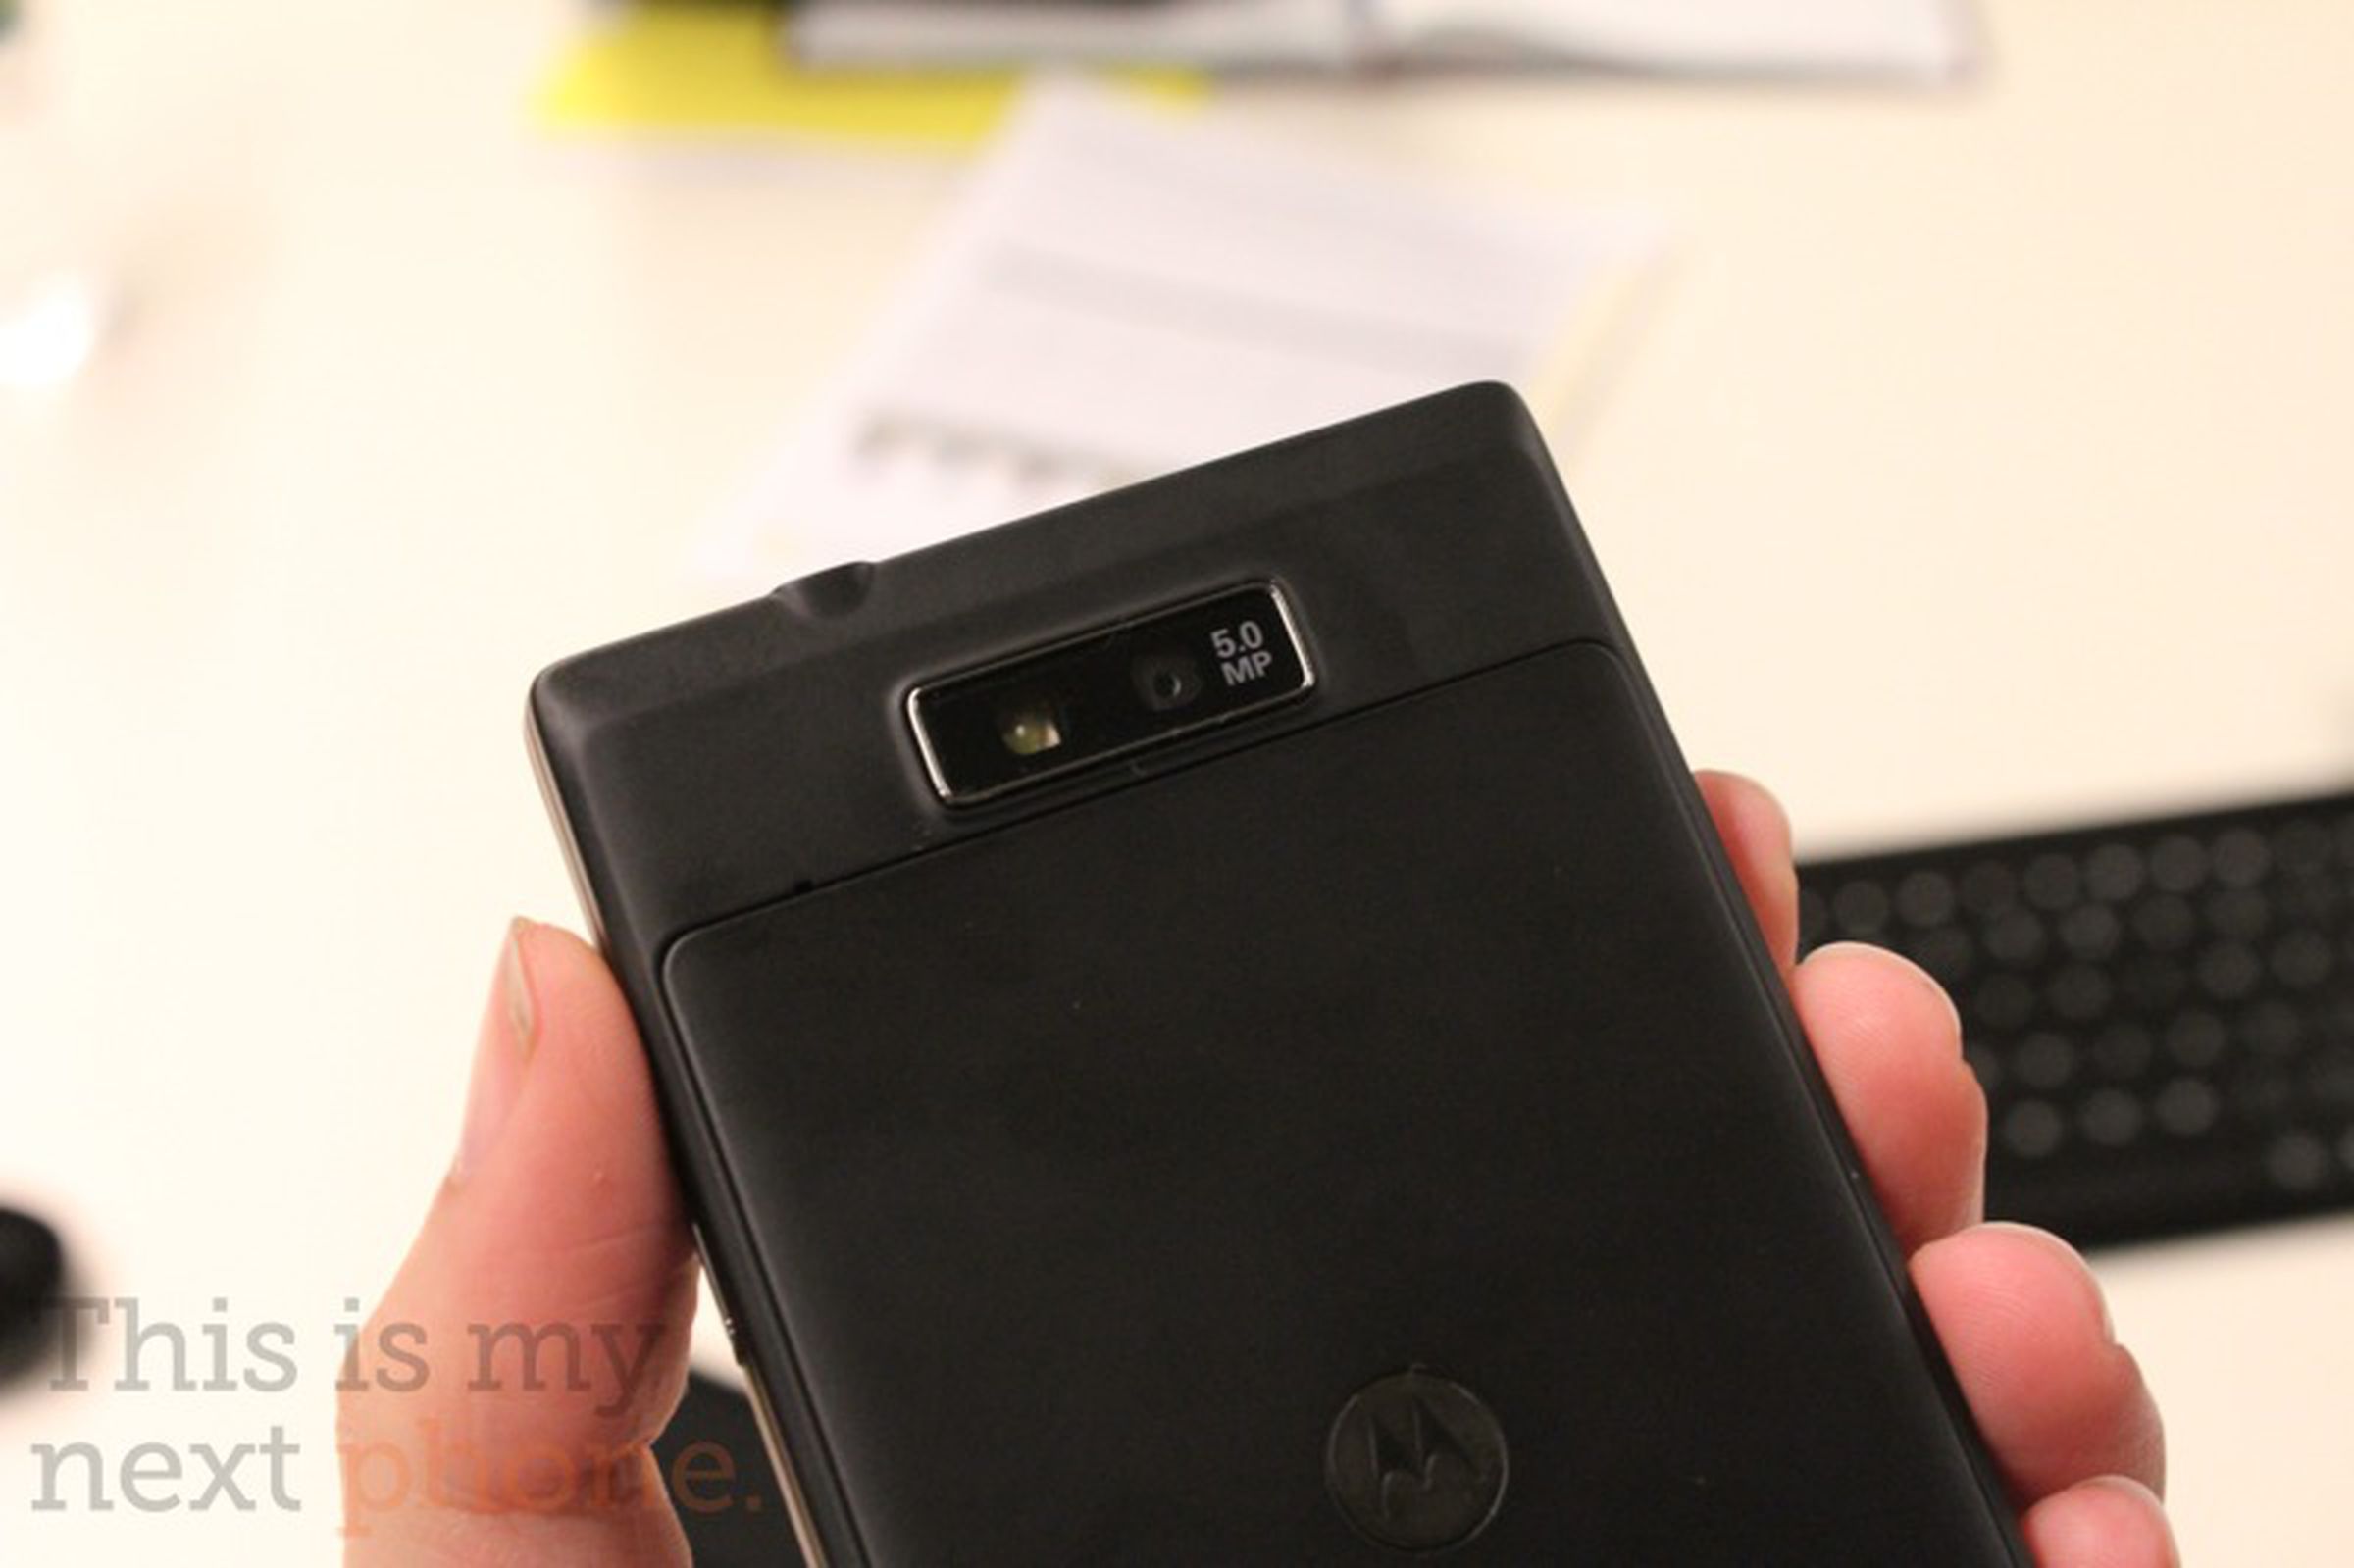 Motorola Triumph for Virgin Mobile pushes the prepaid high end, launches this summer